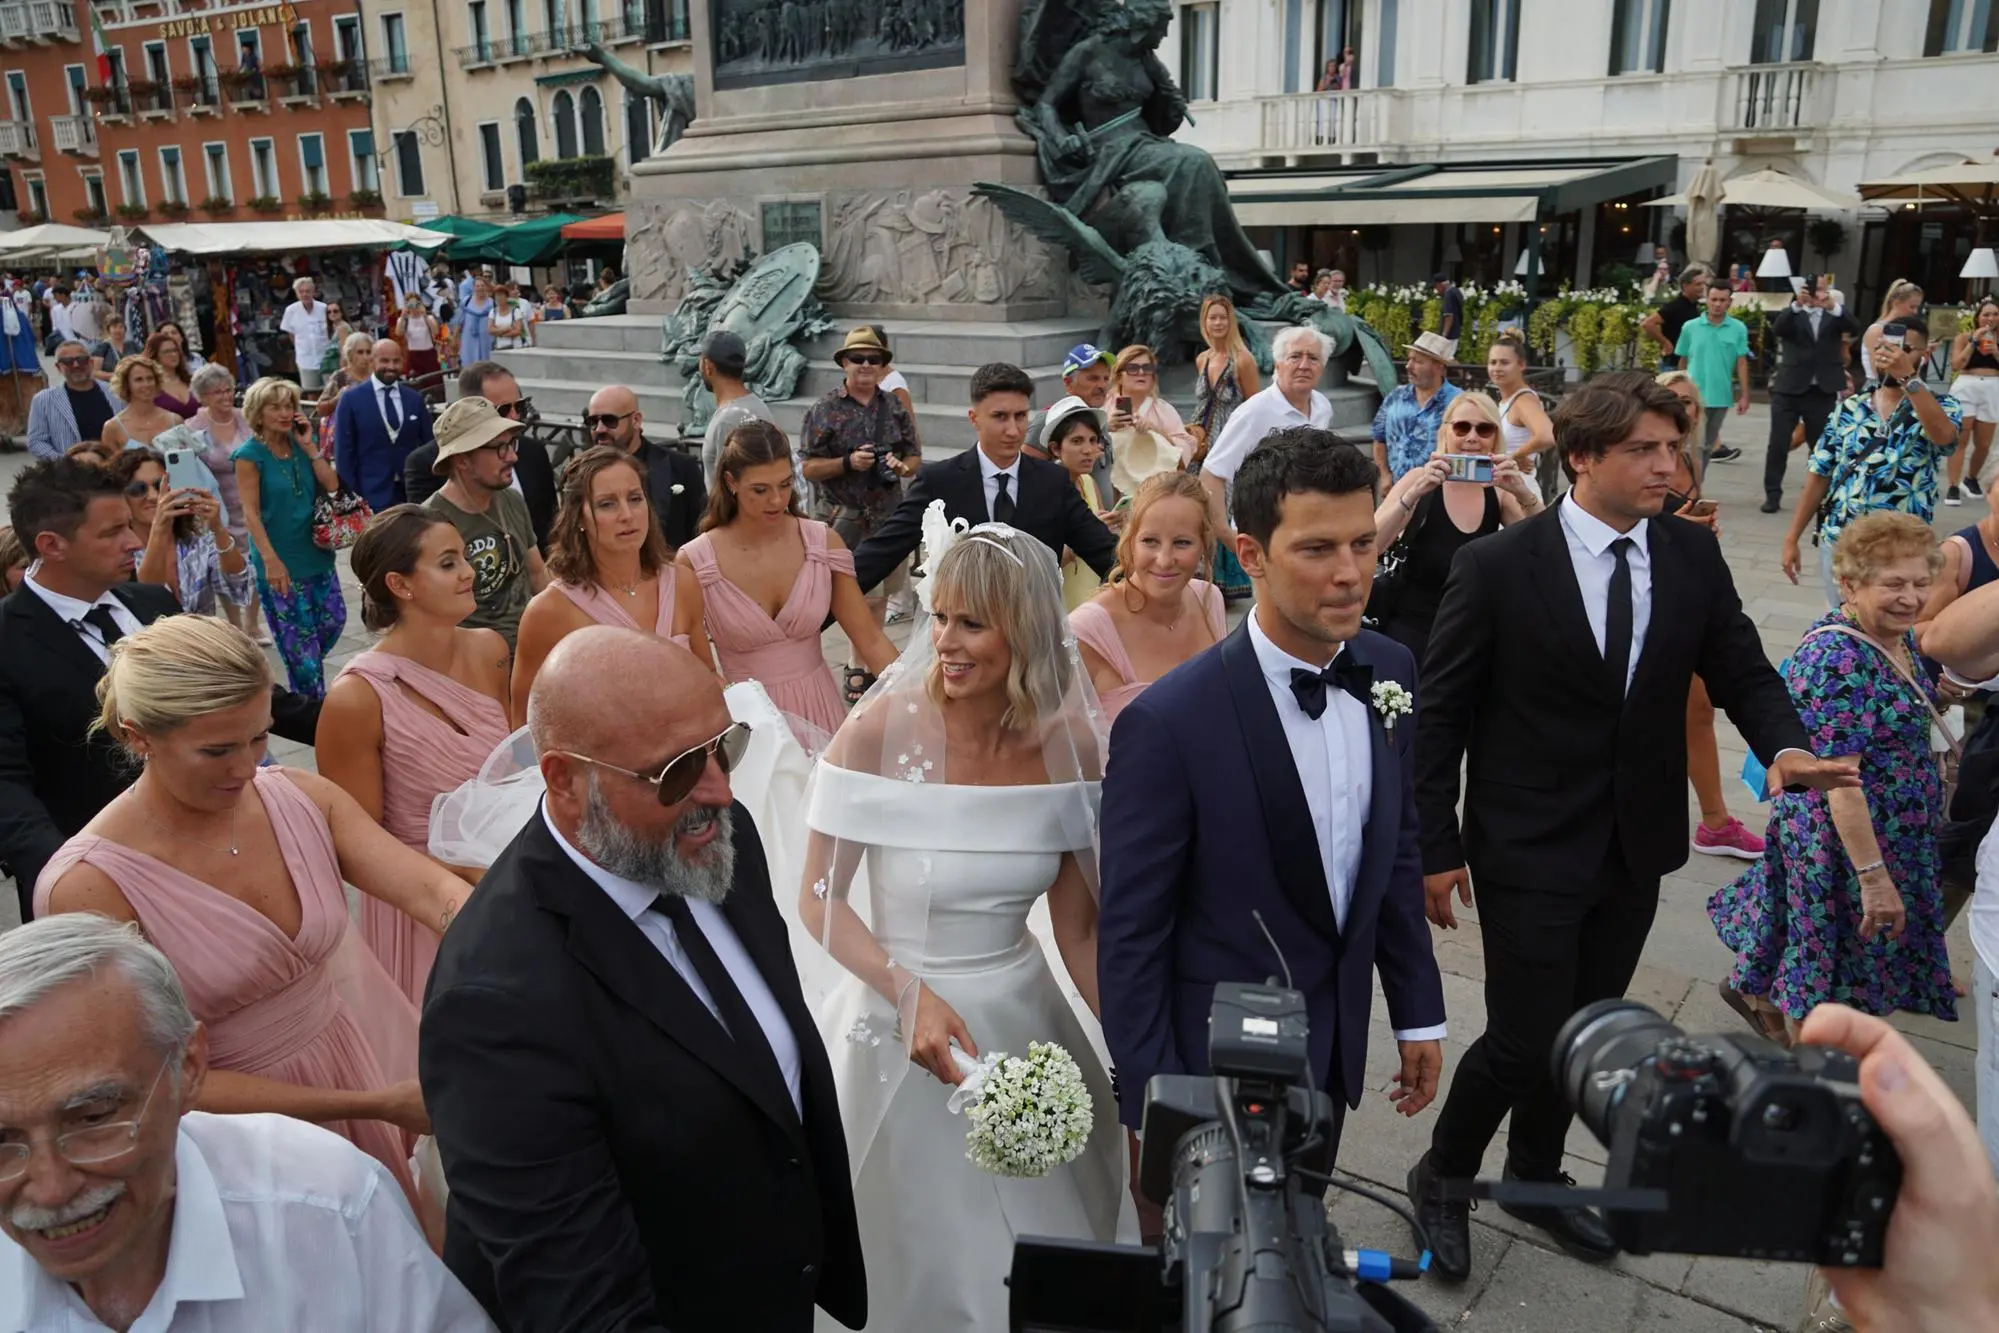 Italian retired swimmer Federica Pellegrini outside the church of San Zaccaria after the celebration of the marriage with her coach Matteo Giunta, in Venice, Italy, 27 August 2022. ANSA/ANDREA MEROLA